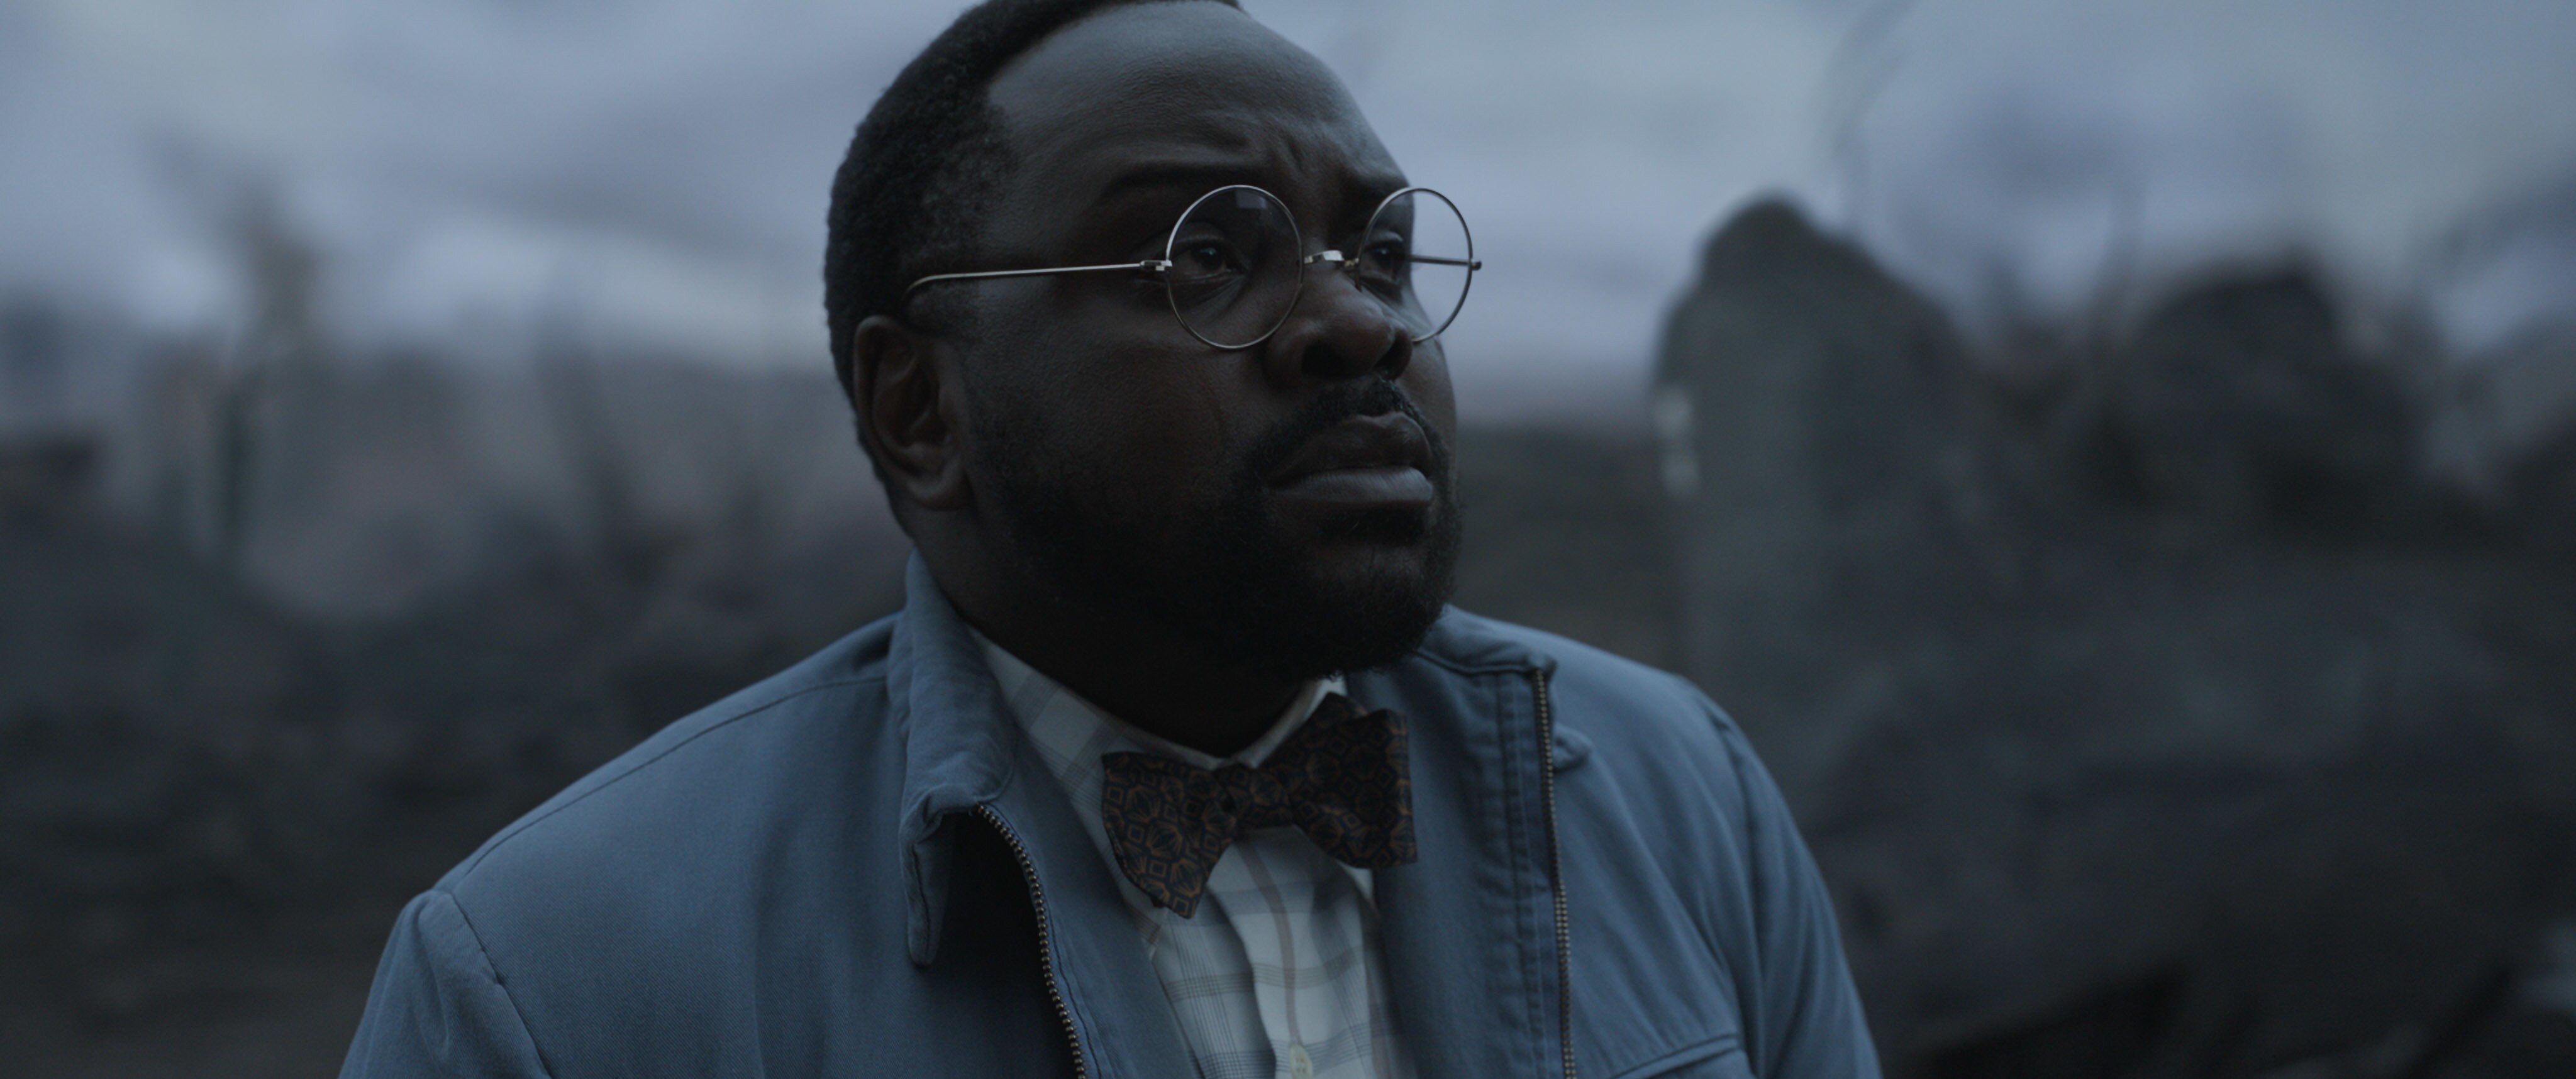 Closeup on Brian Tyree Henry as Phastos. He wears silver, circular wire-rim glasses, a light blue windbreaker, a plaid shirt, and a bow-tie.